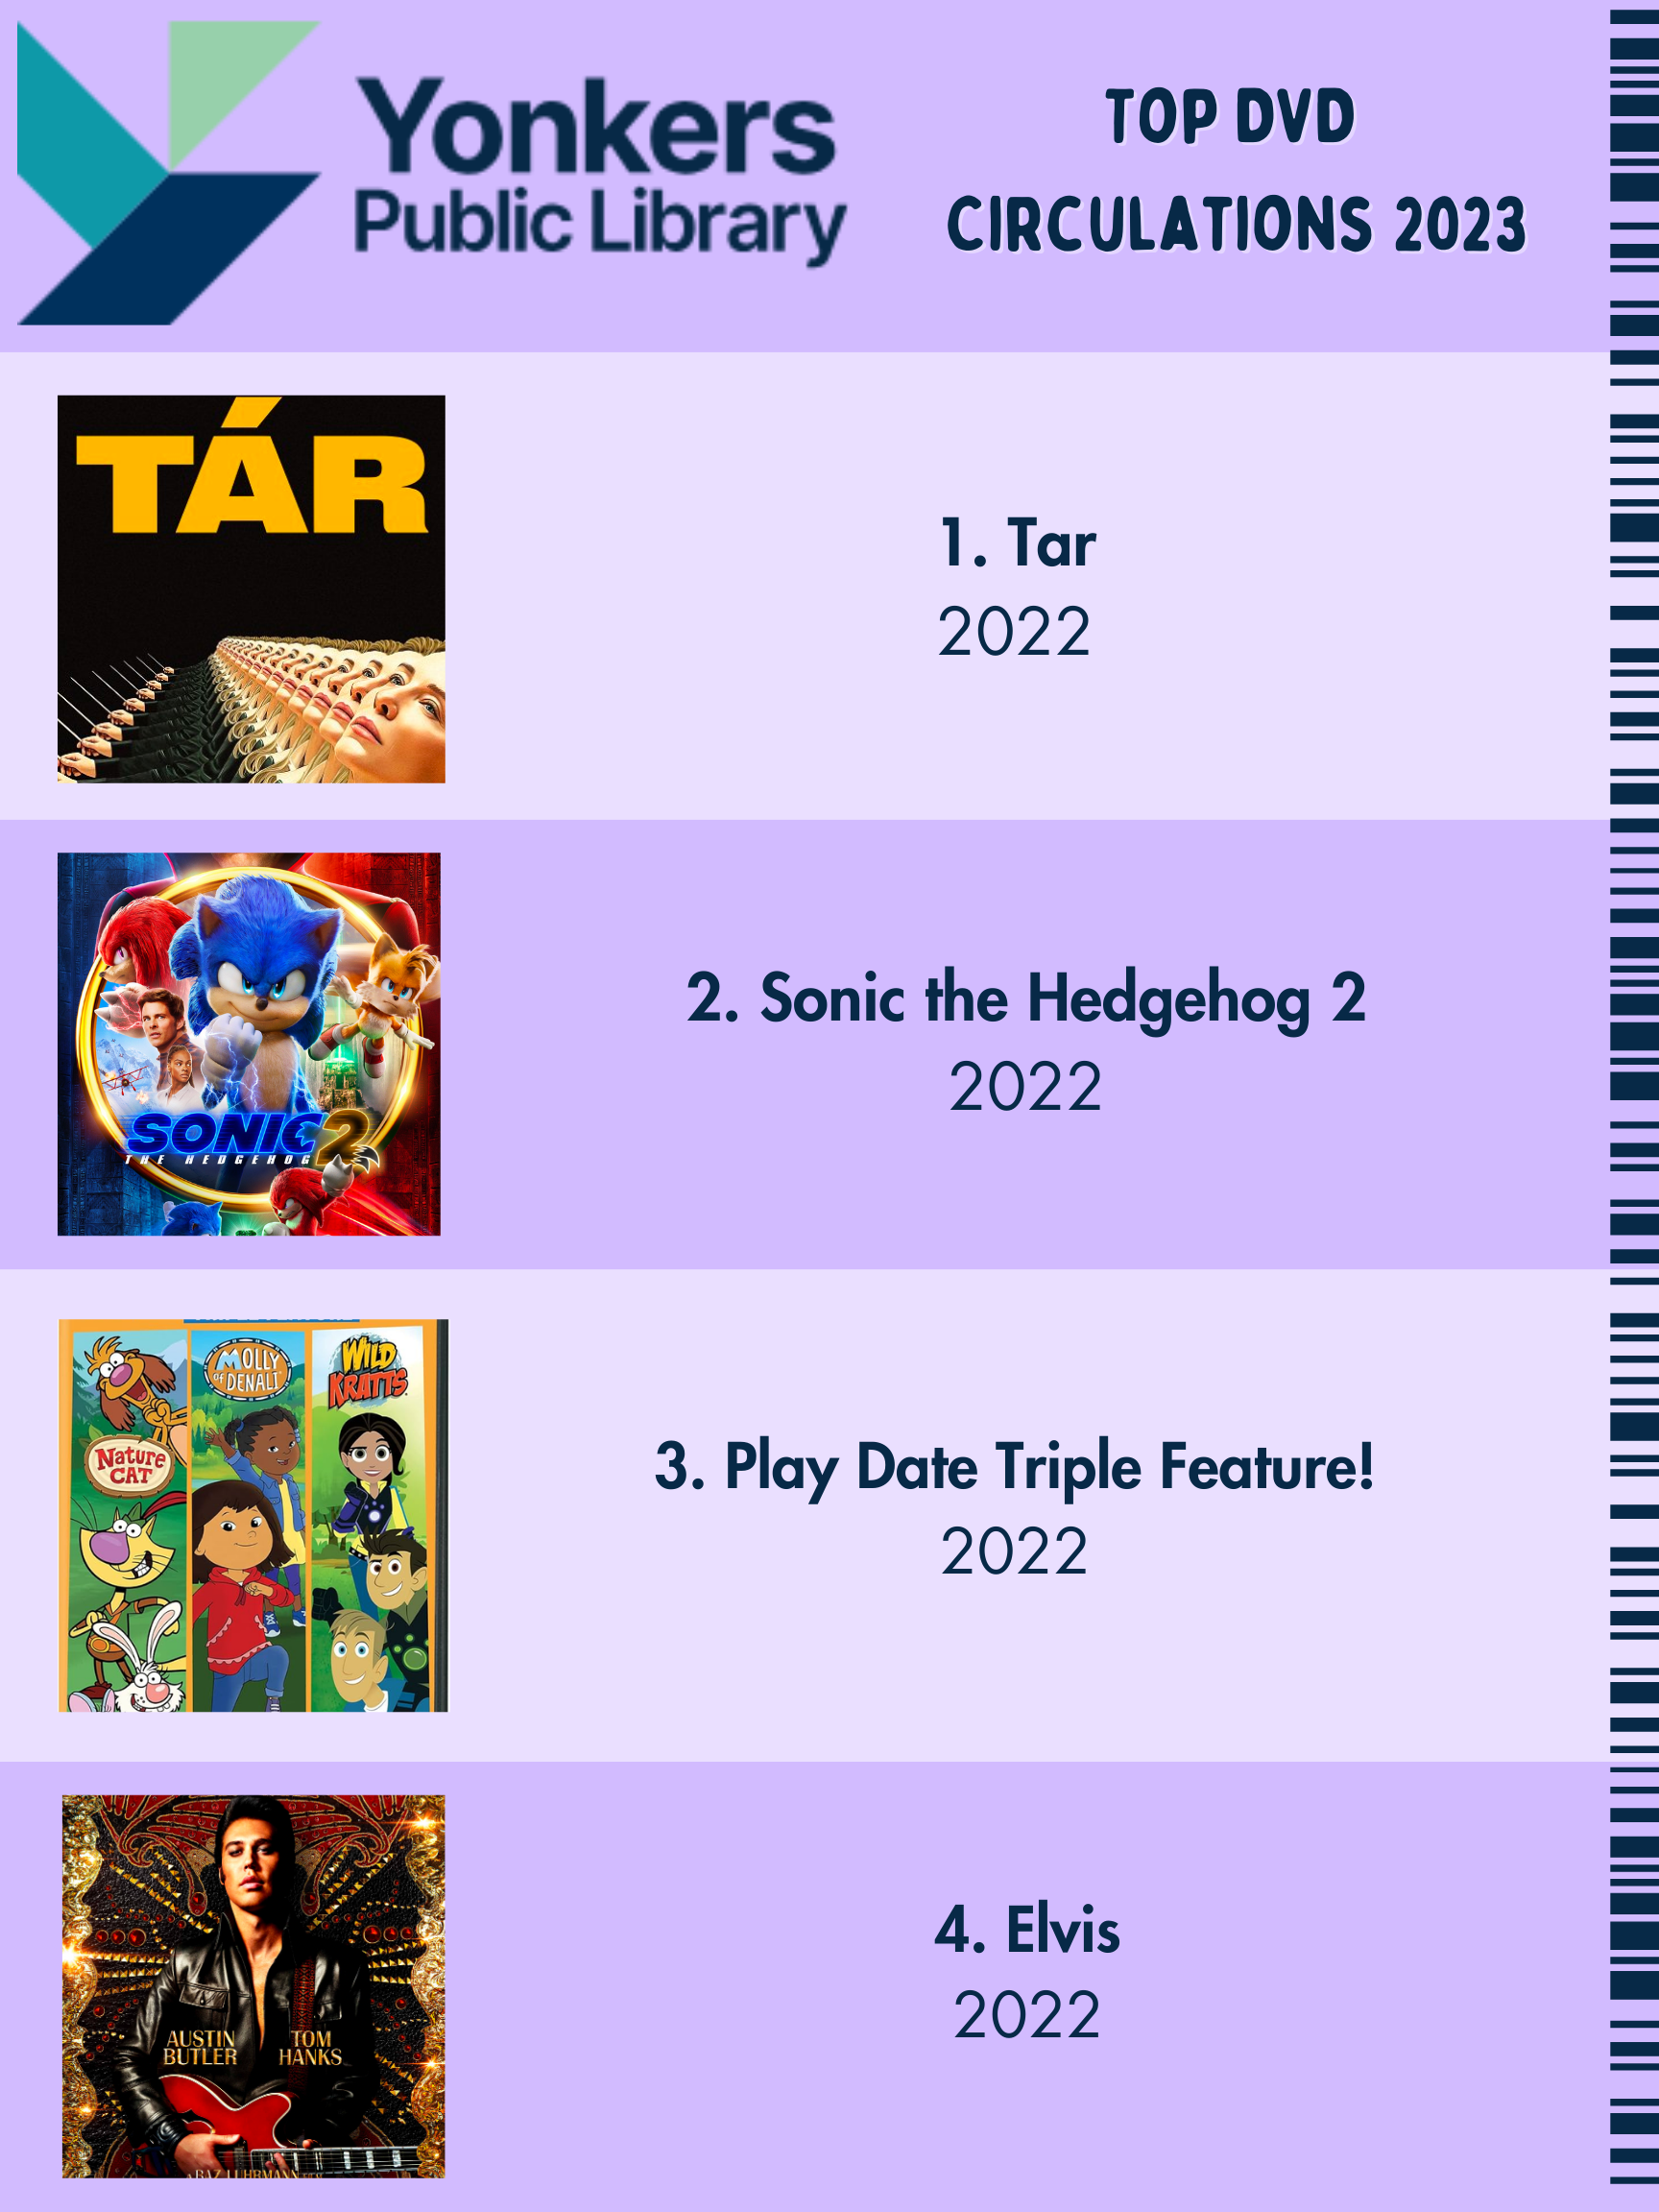 Top DVD Circulations 2023. Tar, Sonic the Hedgehog 2, Play Date Triple Feature and Elvis.